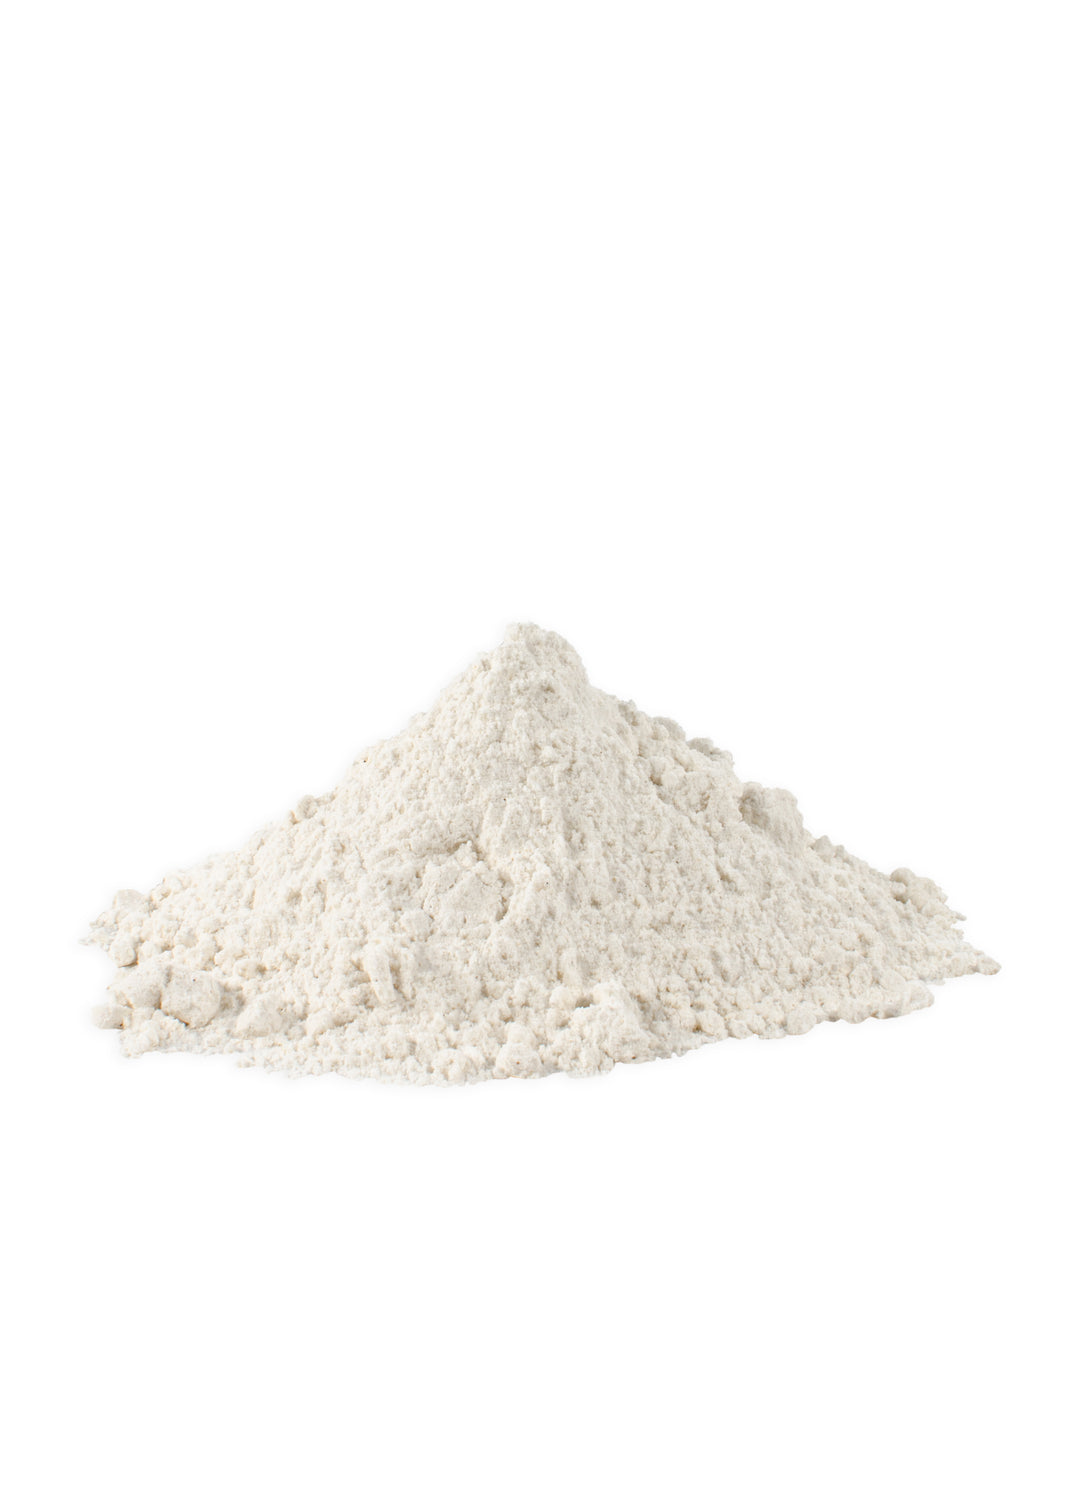 Bob's Red Mill Natural Foods Inc Organic Unbleached White All-Purpose Flour-50 lb.